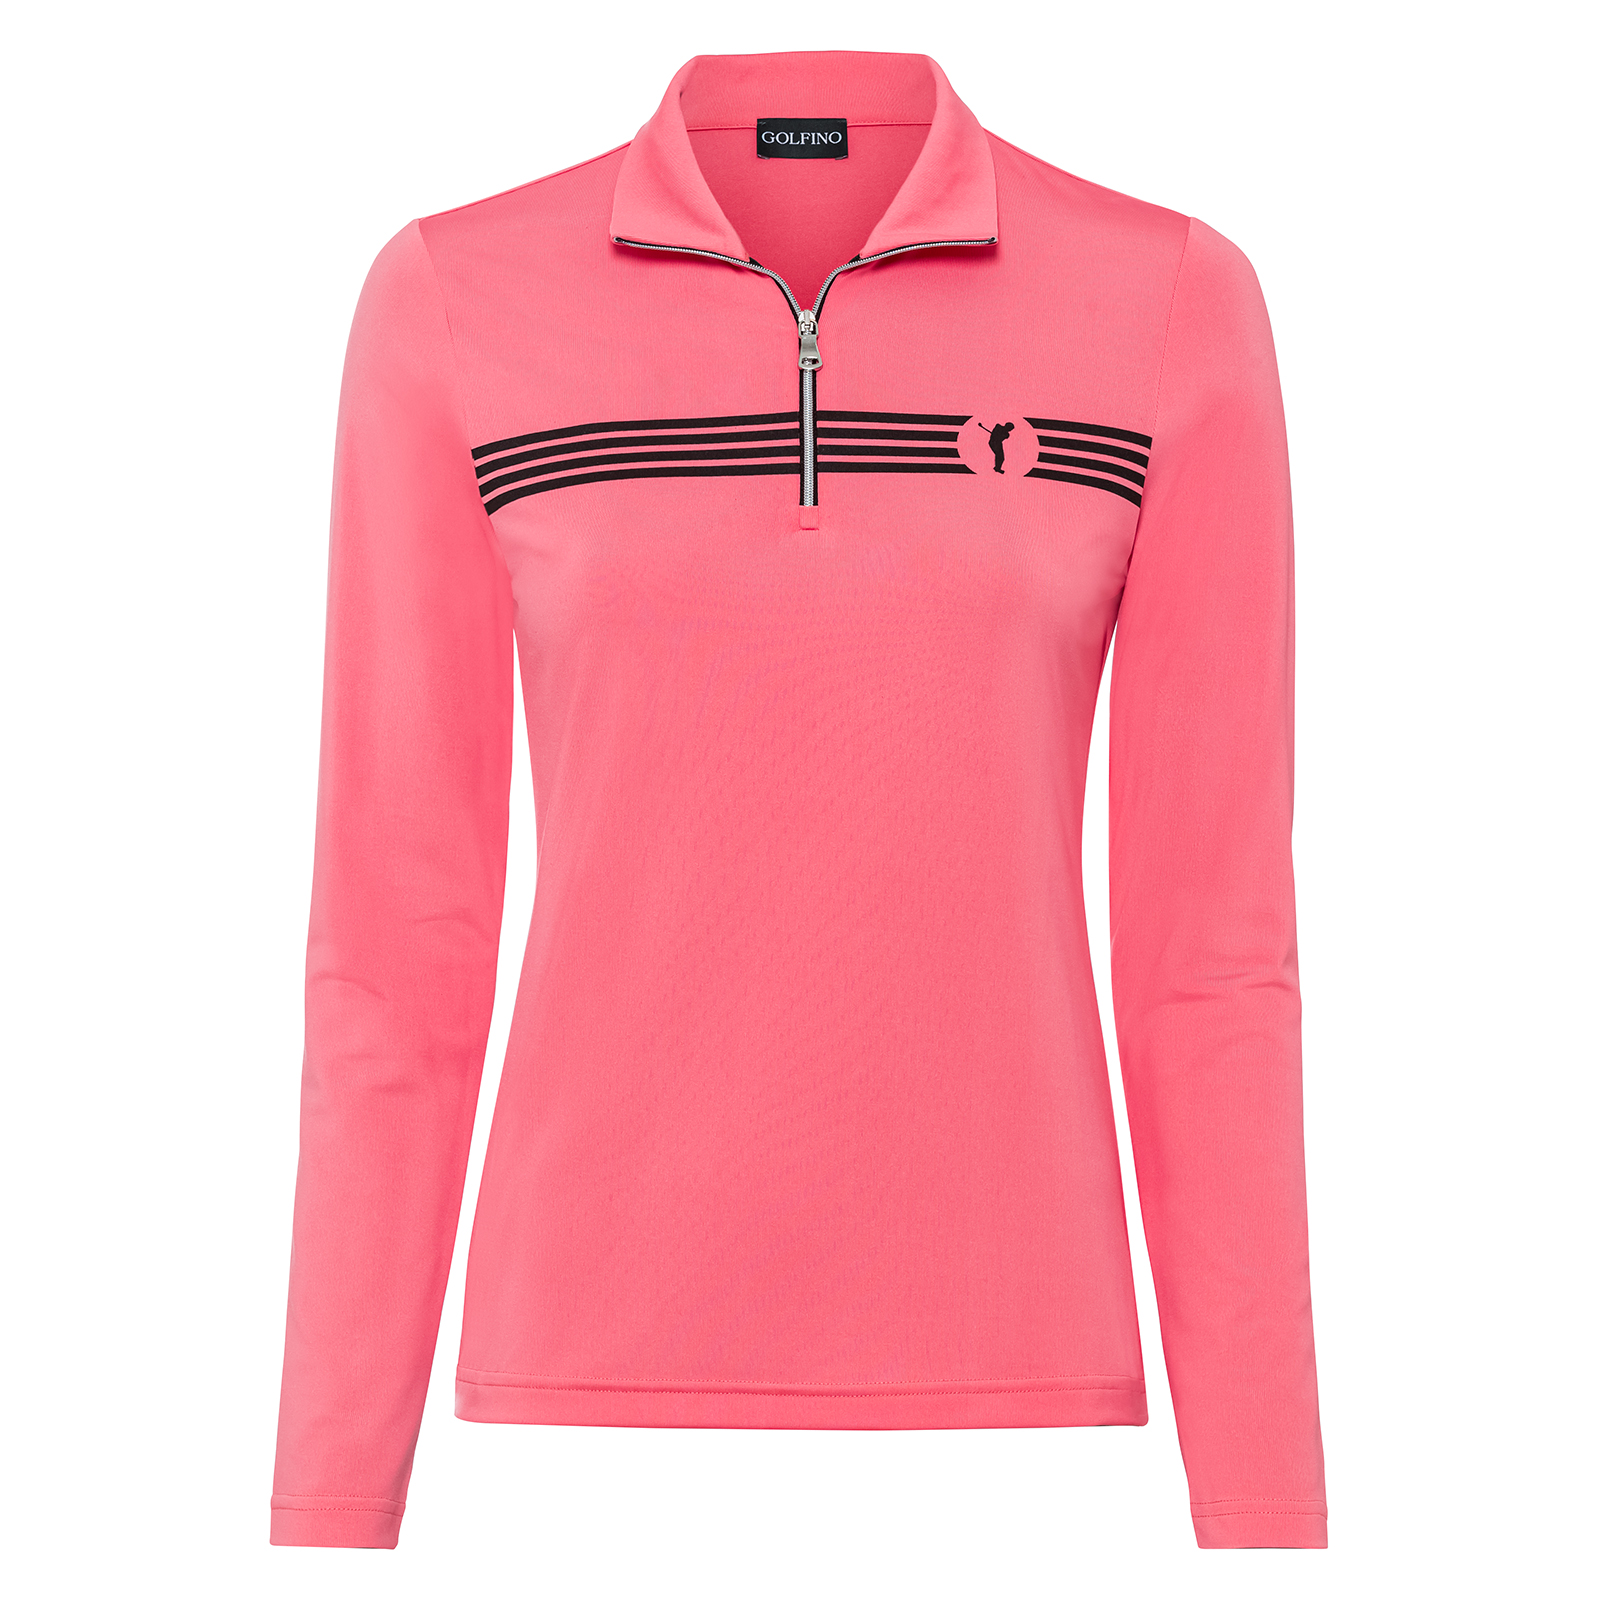 Ladies long-sleeved golf shirt with innovative printed logo 